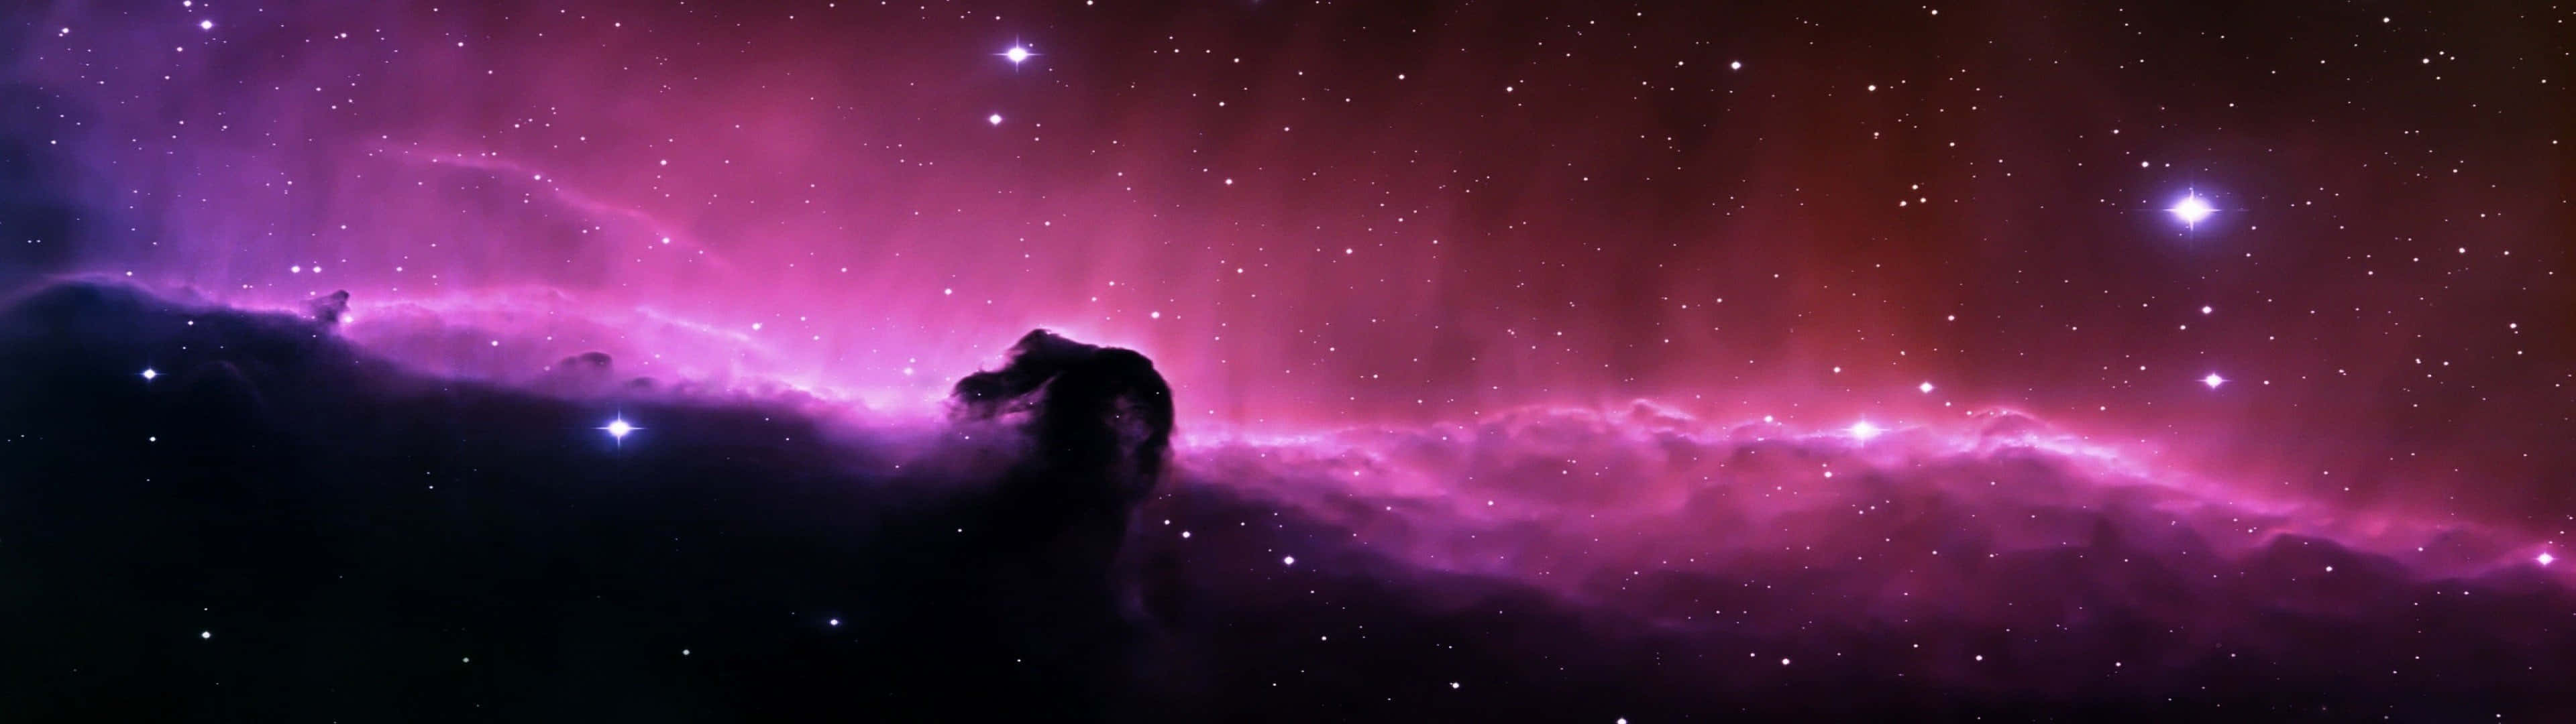 Space Hd 3840x1080 Pink Aesthetic Wallpaper